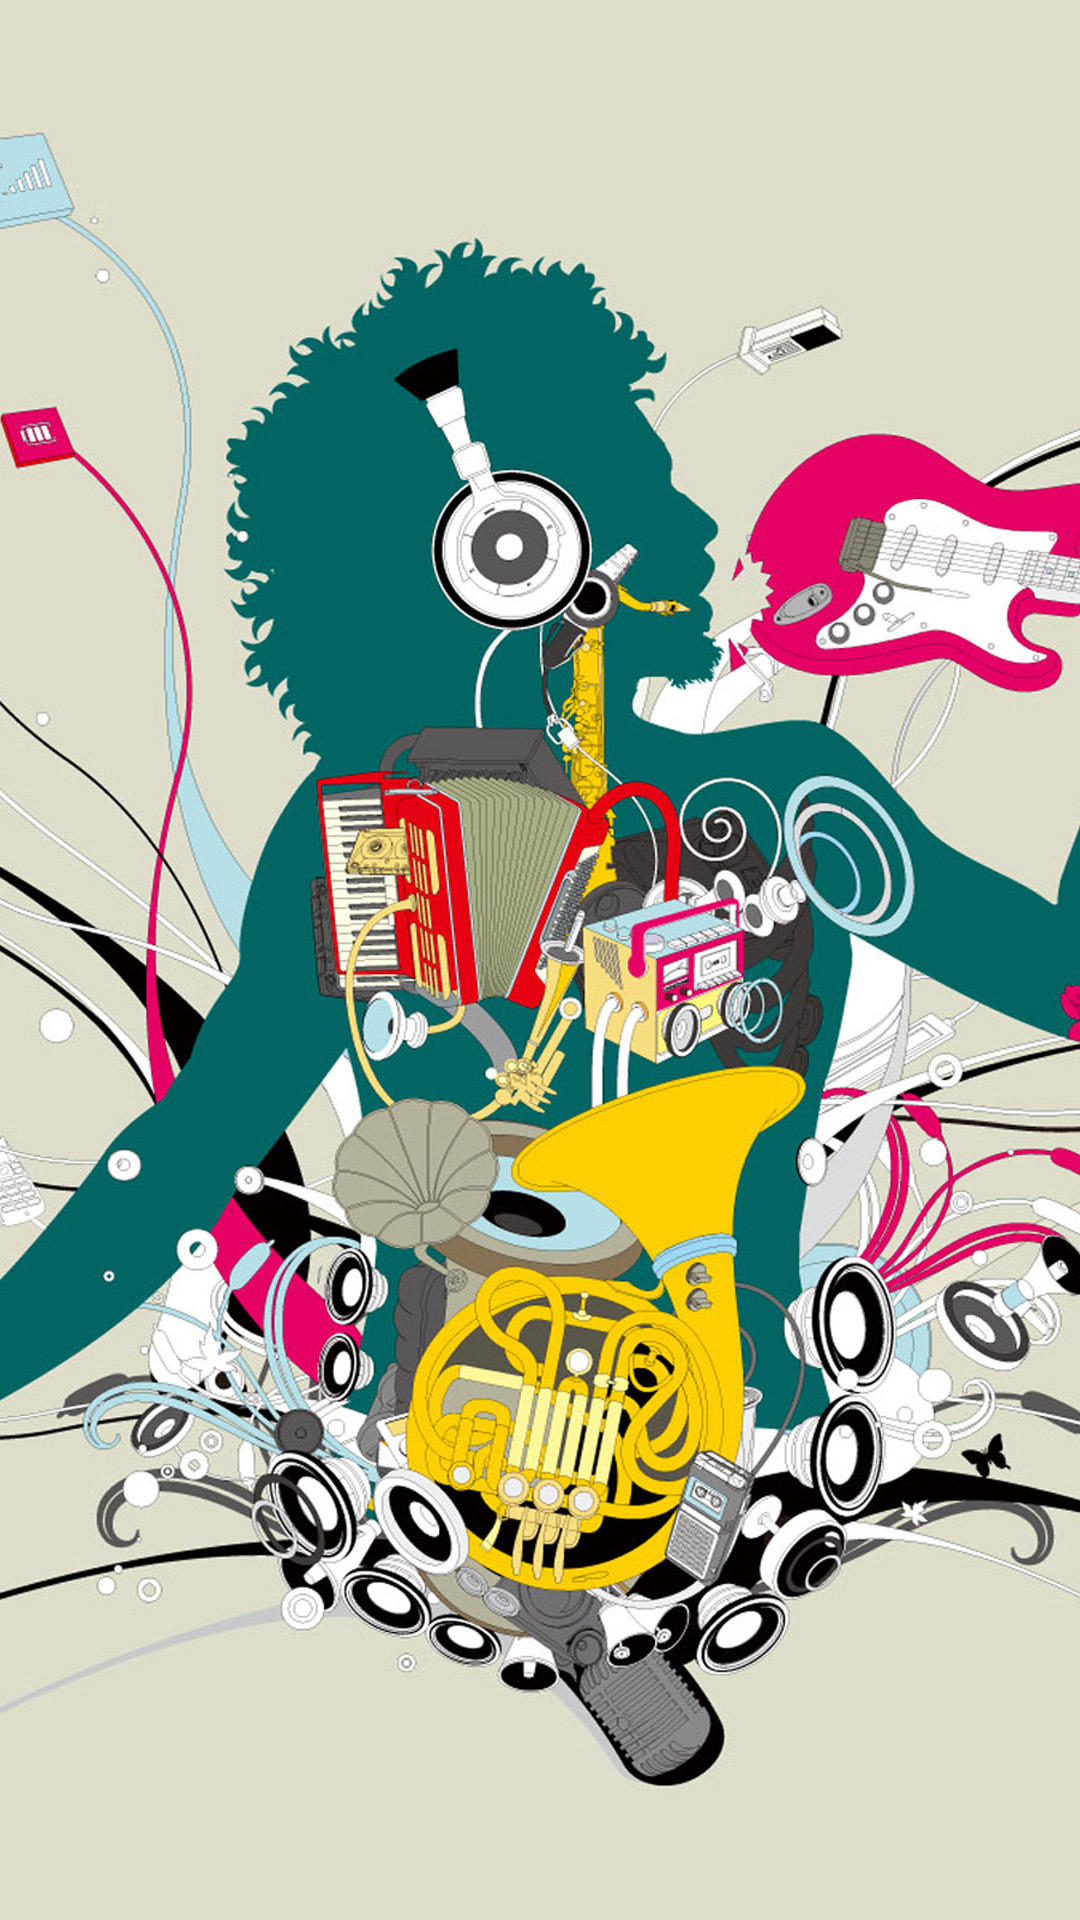 music wallpaper for android,graphic design,illustration,poster,art,font